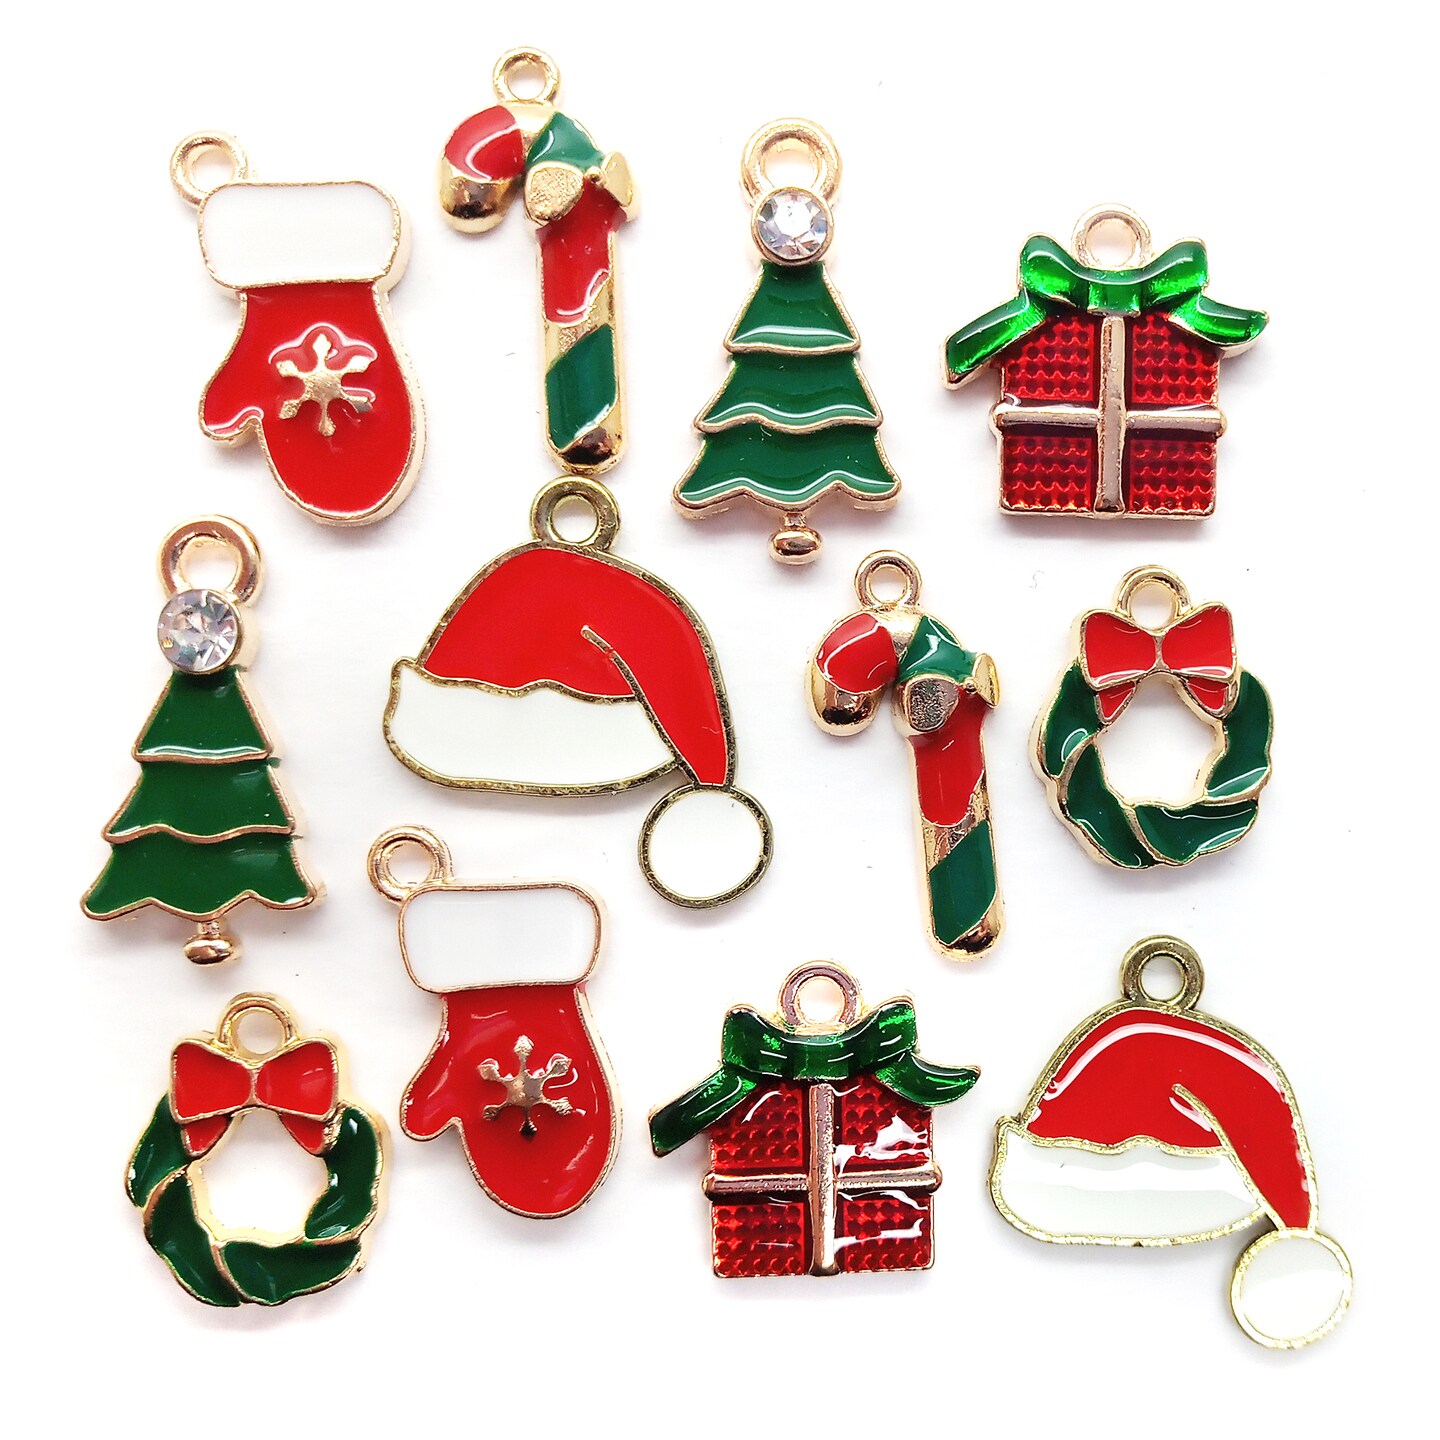 30pcs small charms Unique Creative Festive Independent Day Charms